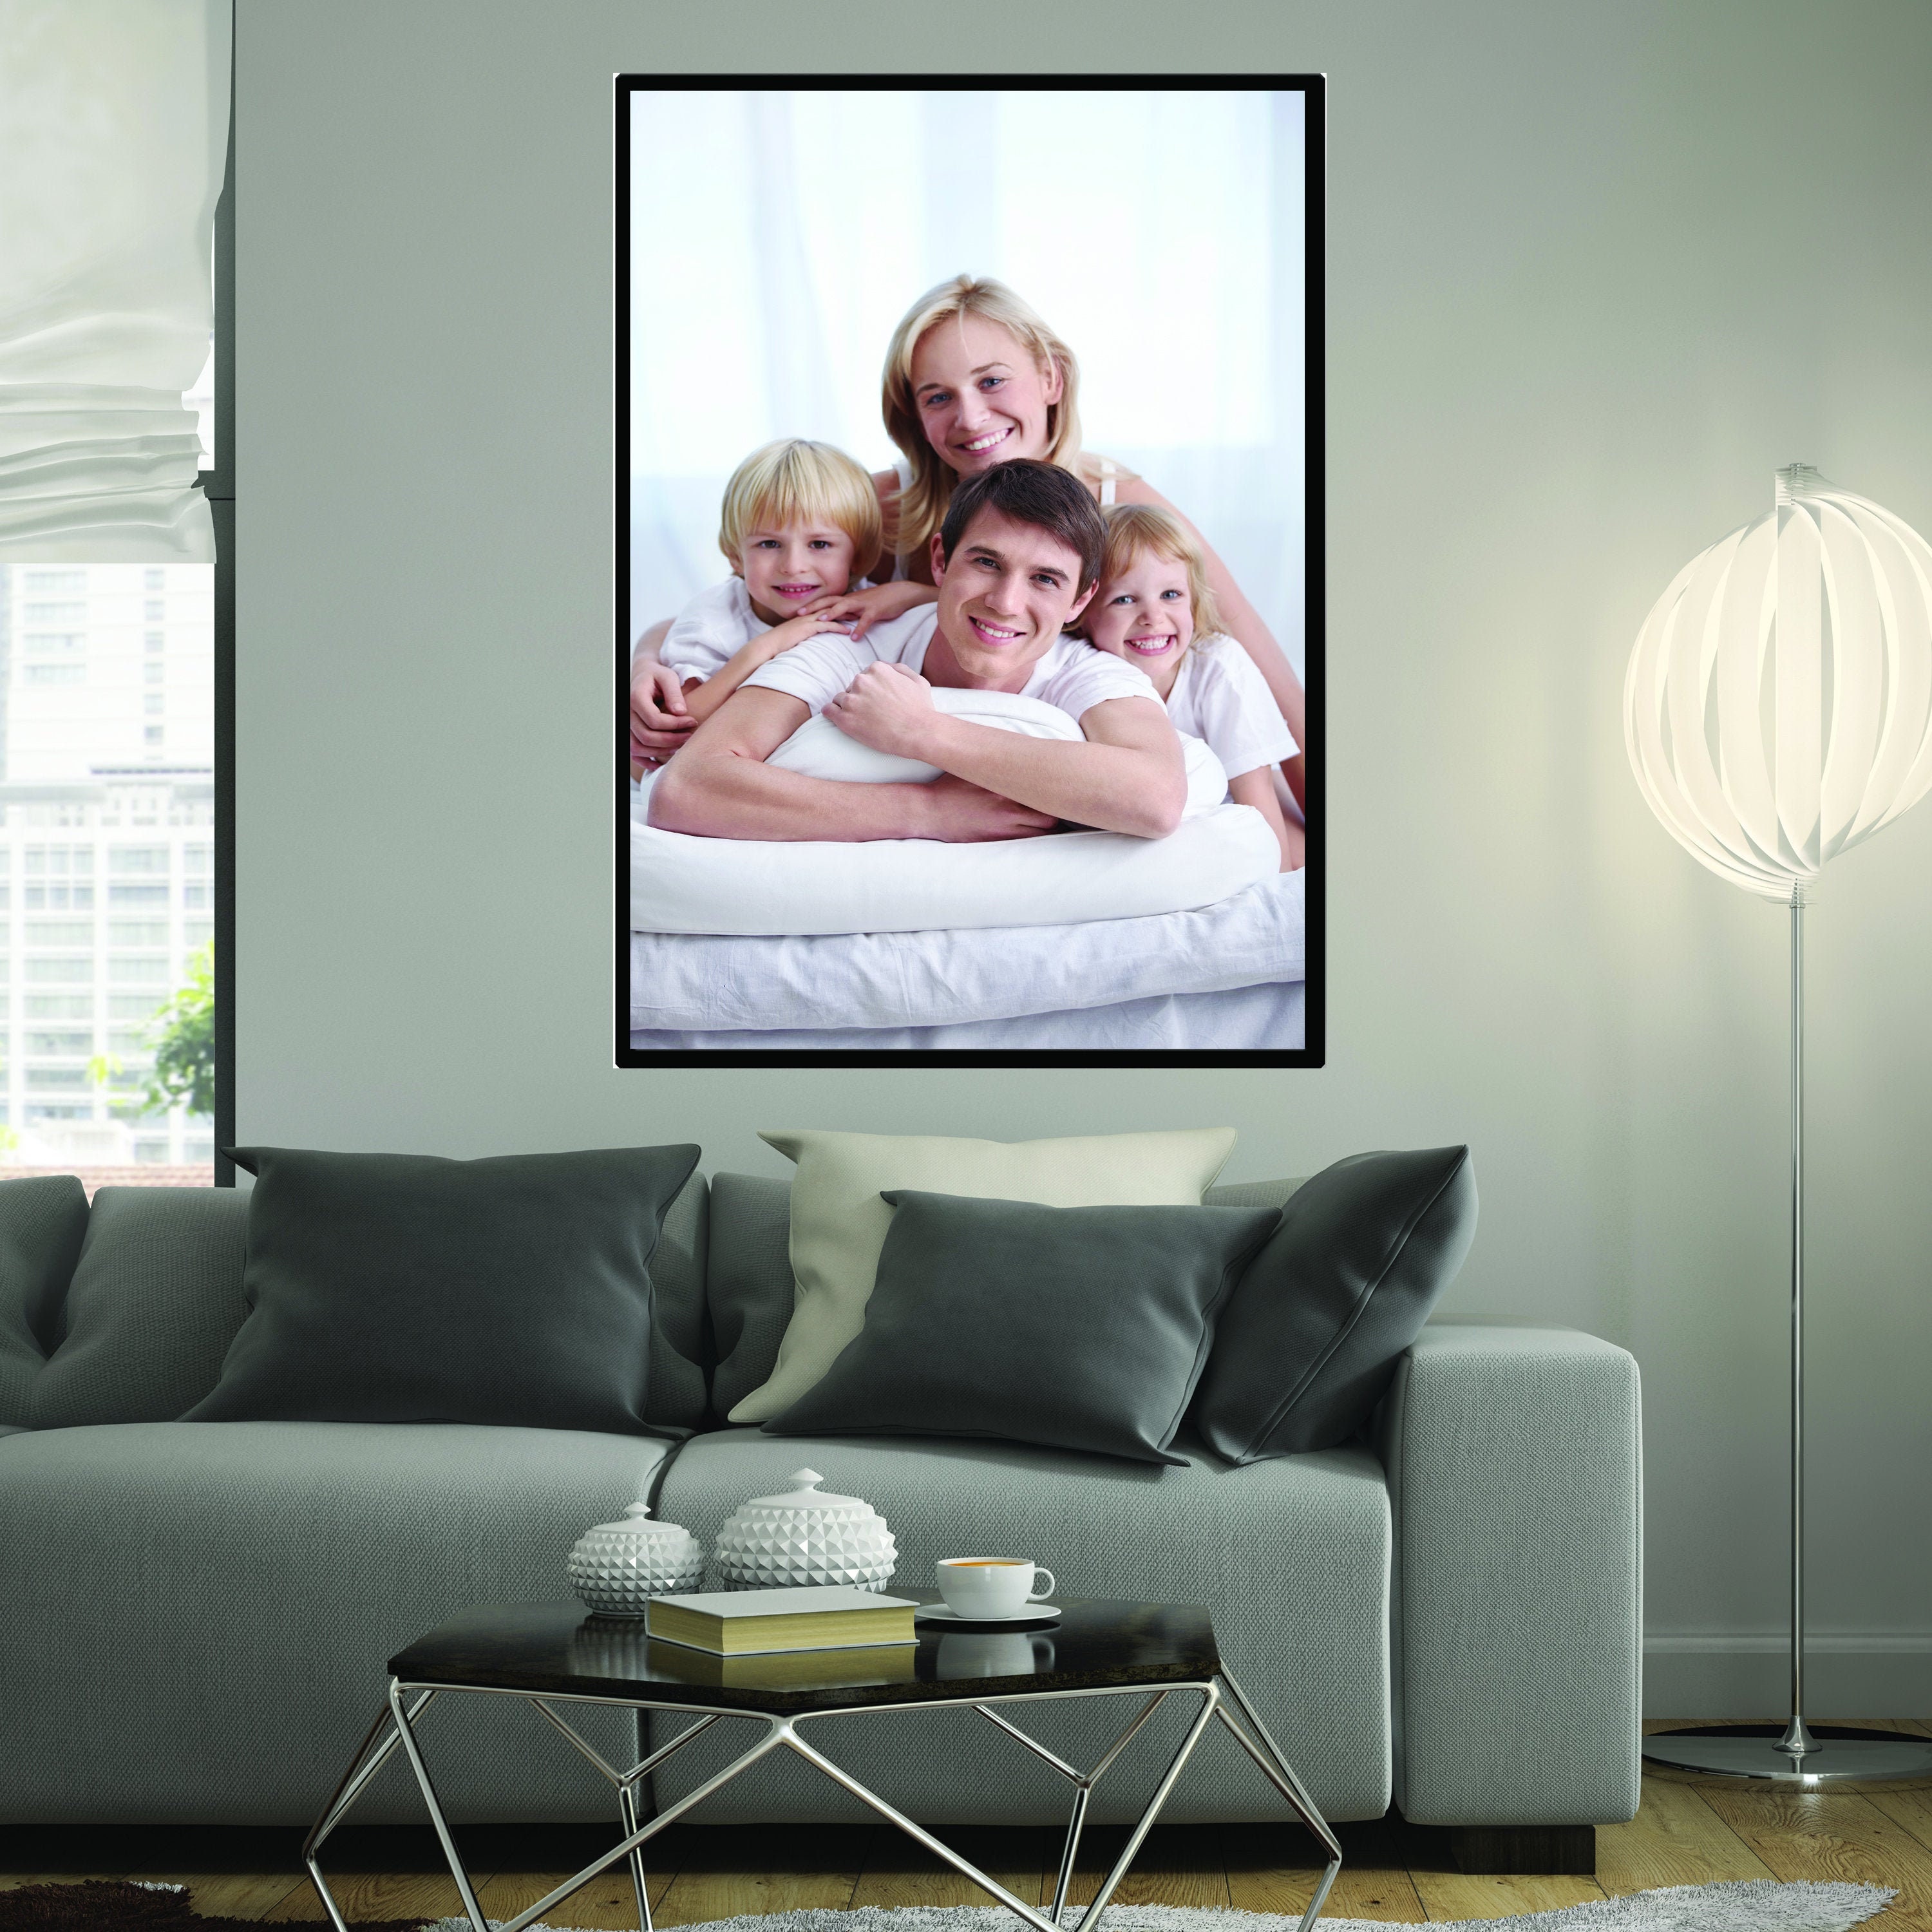 Discover Custom Photo Poster Print - Create Make Your Own Personalized